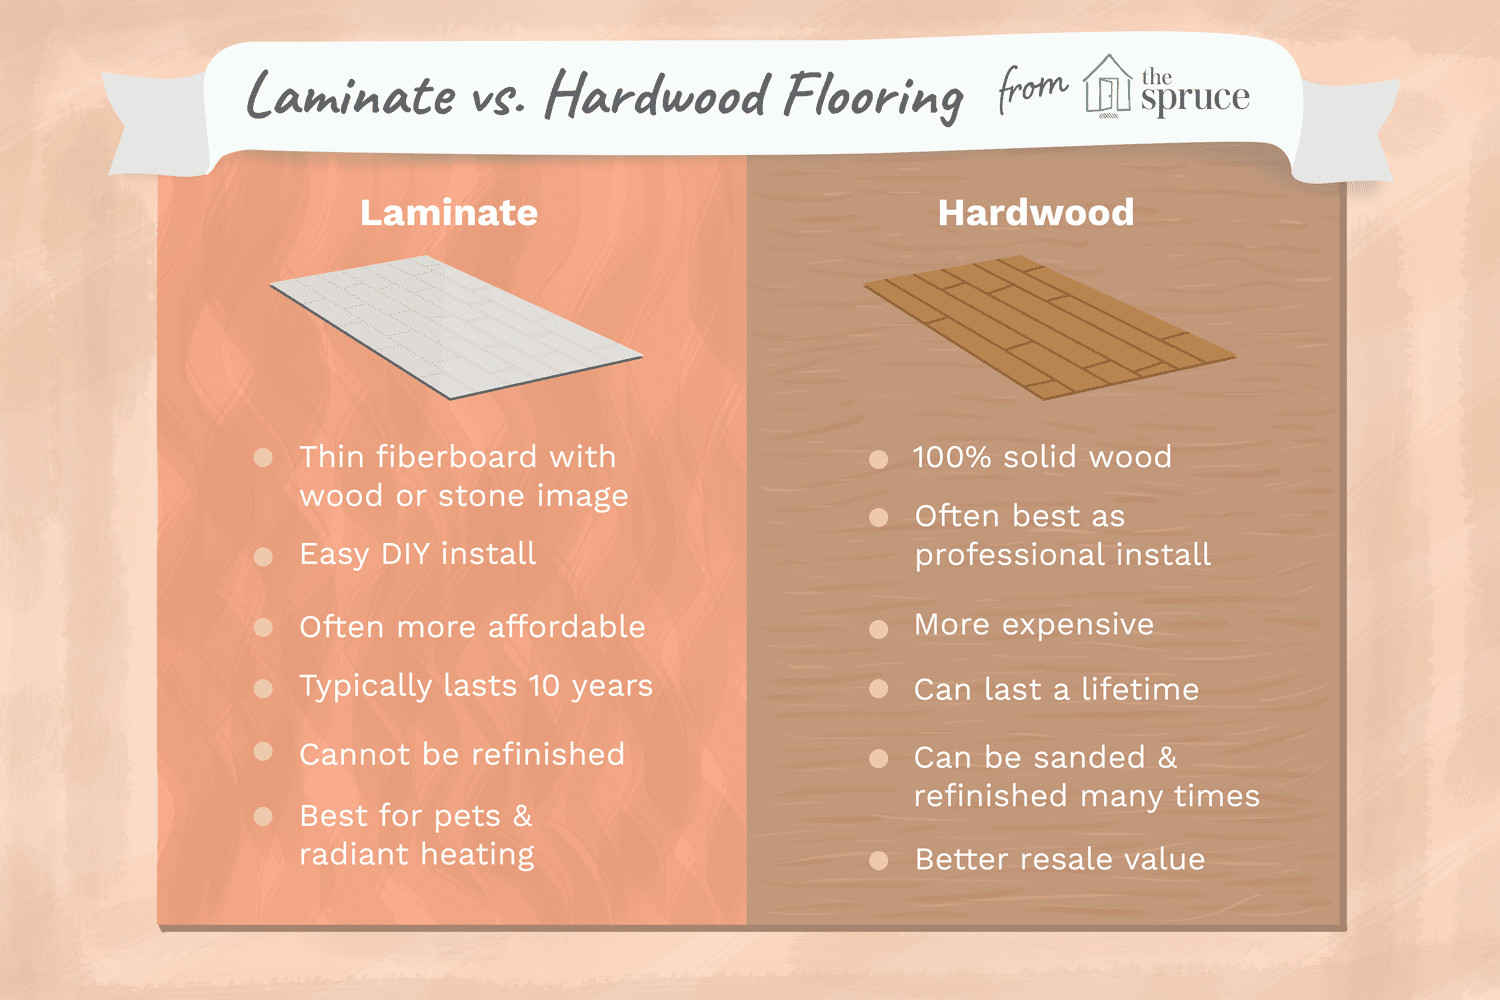 10 Unique Hardwood Flooring Types Pros and Cons 2024 free download hardwood flooring types pros and cons of laminate vs hardwood doesnt have to be a hard decision regarding hardwood doesnt have to be a hard decision